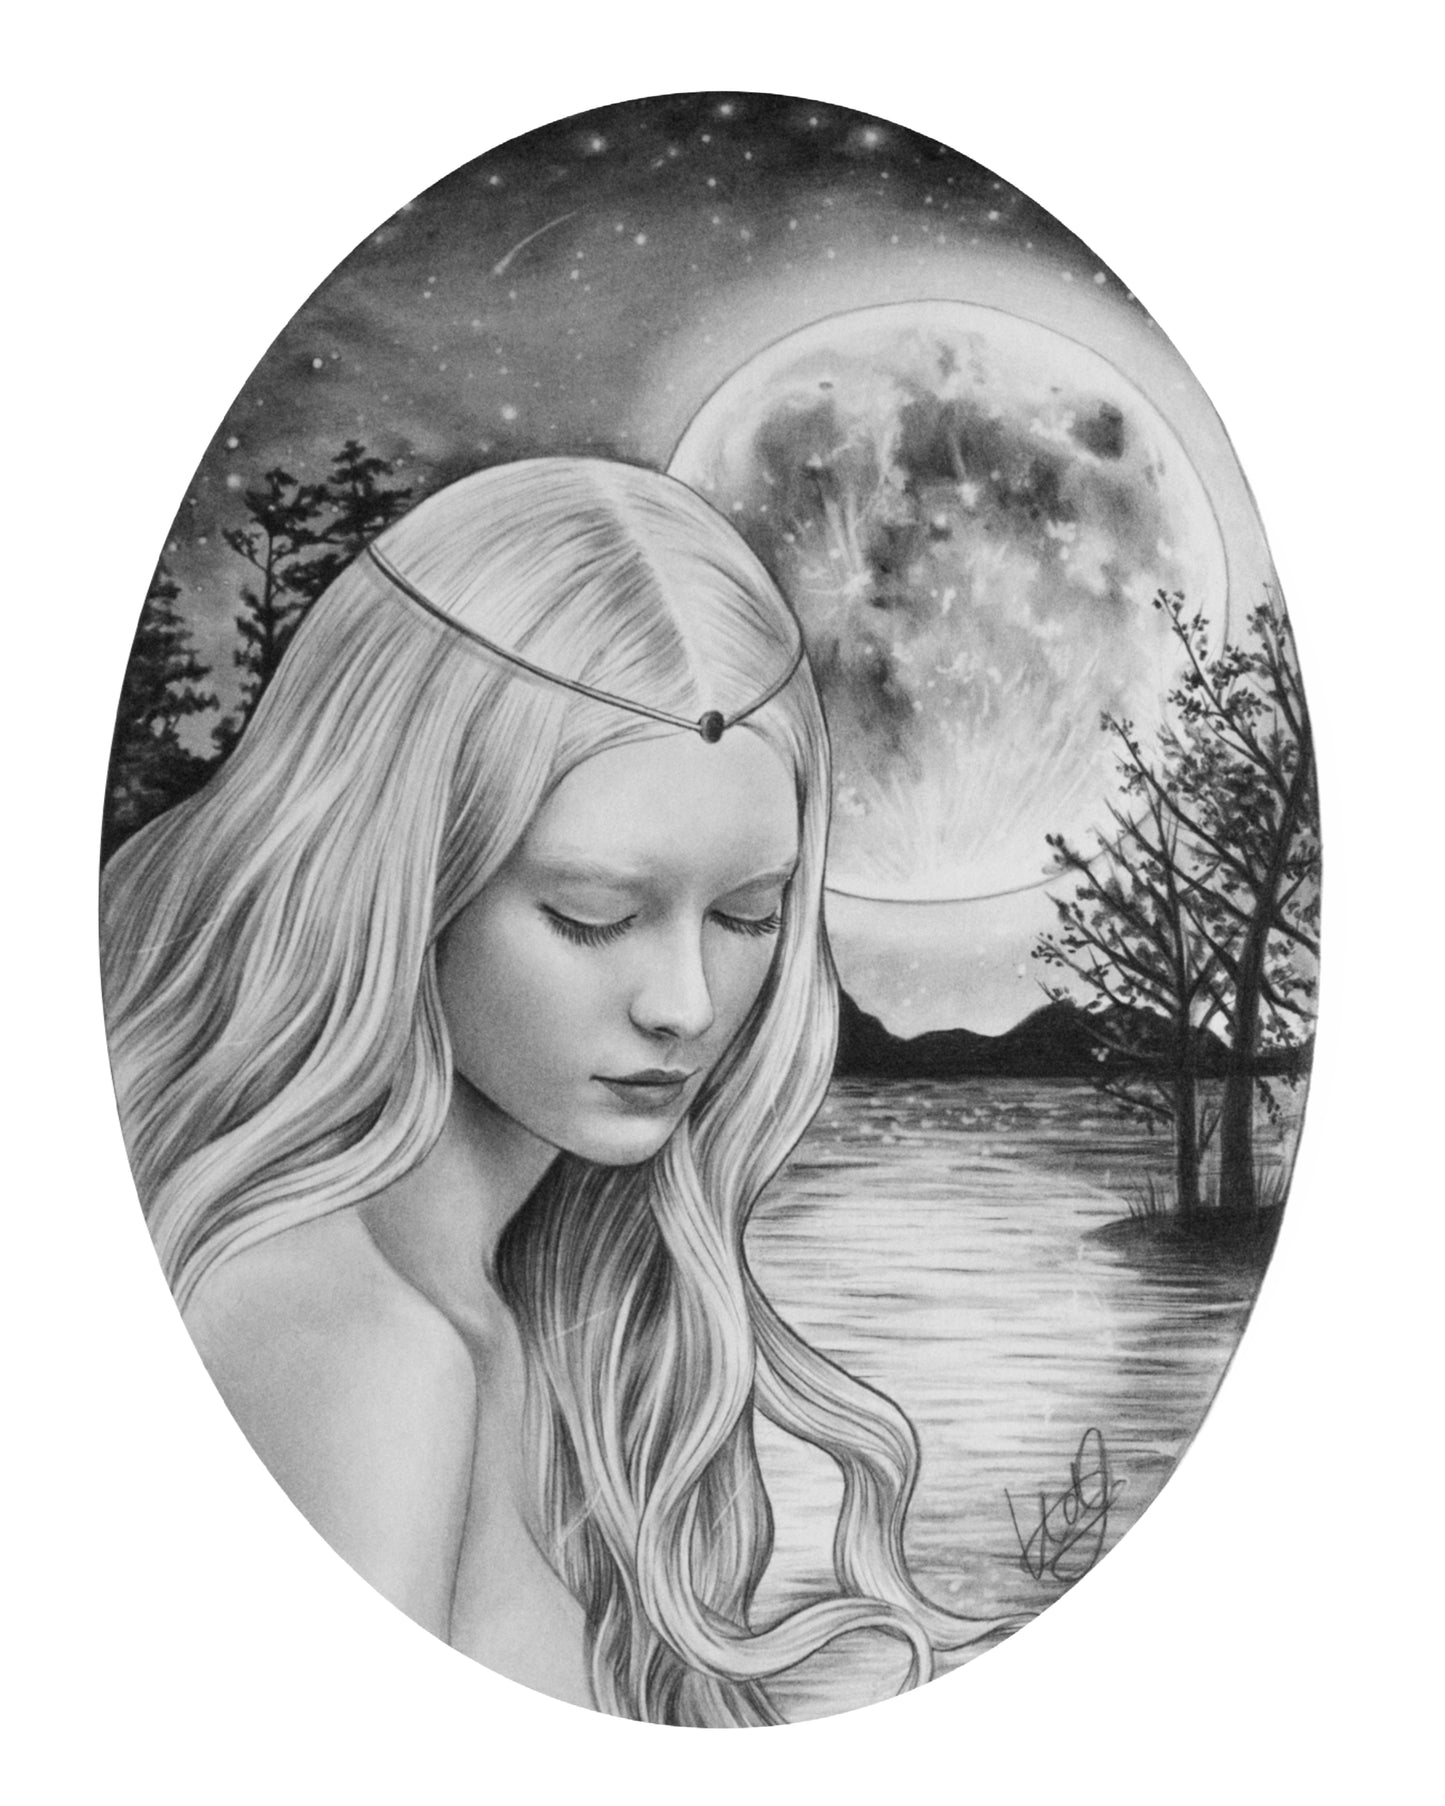 A graphite art depiction of a young princess reflects by the water under a full moon-lit sky.